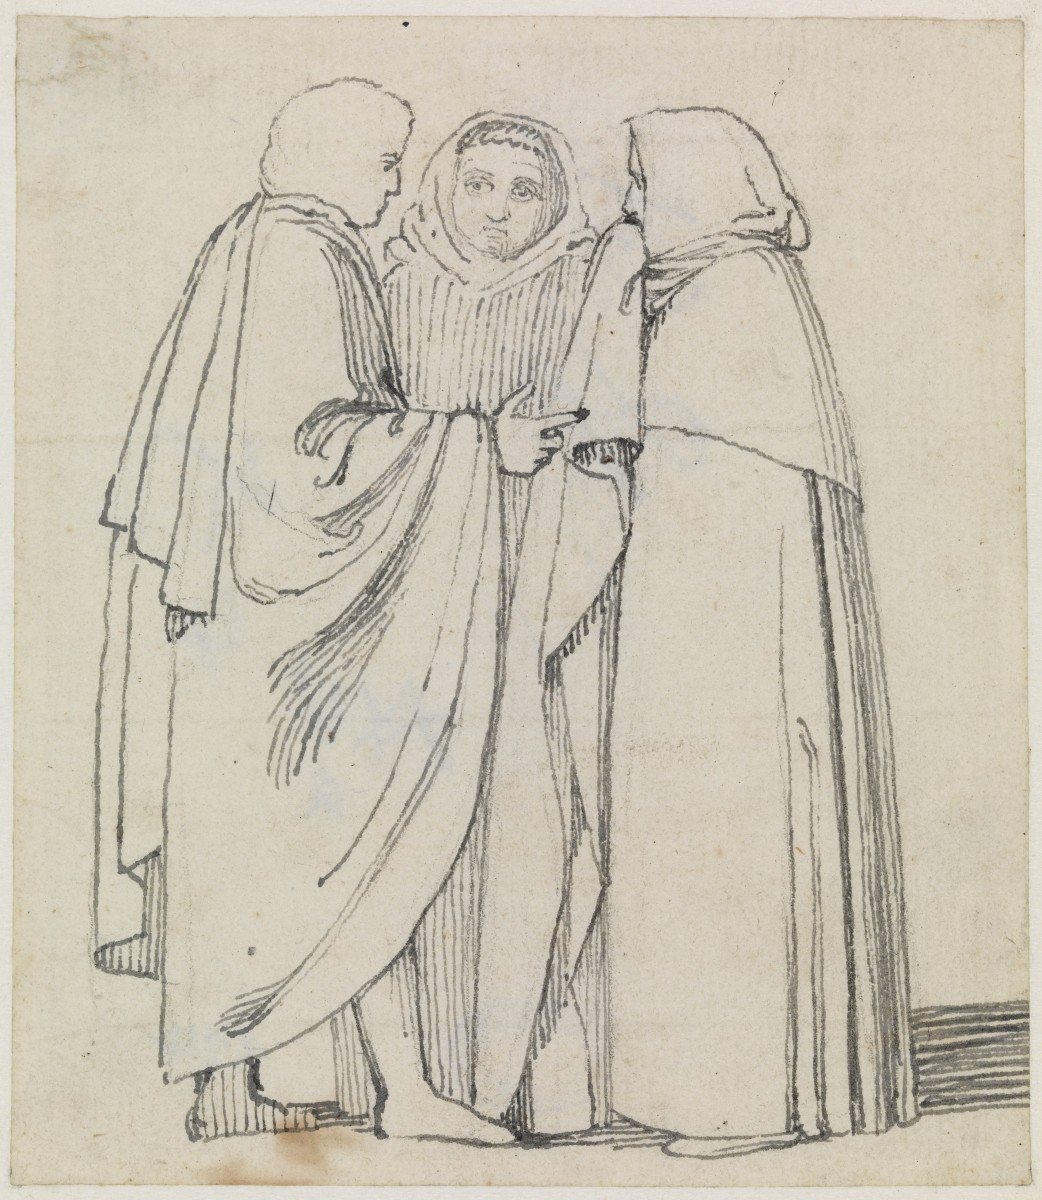 A Group of Three Cloaked Figures